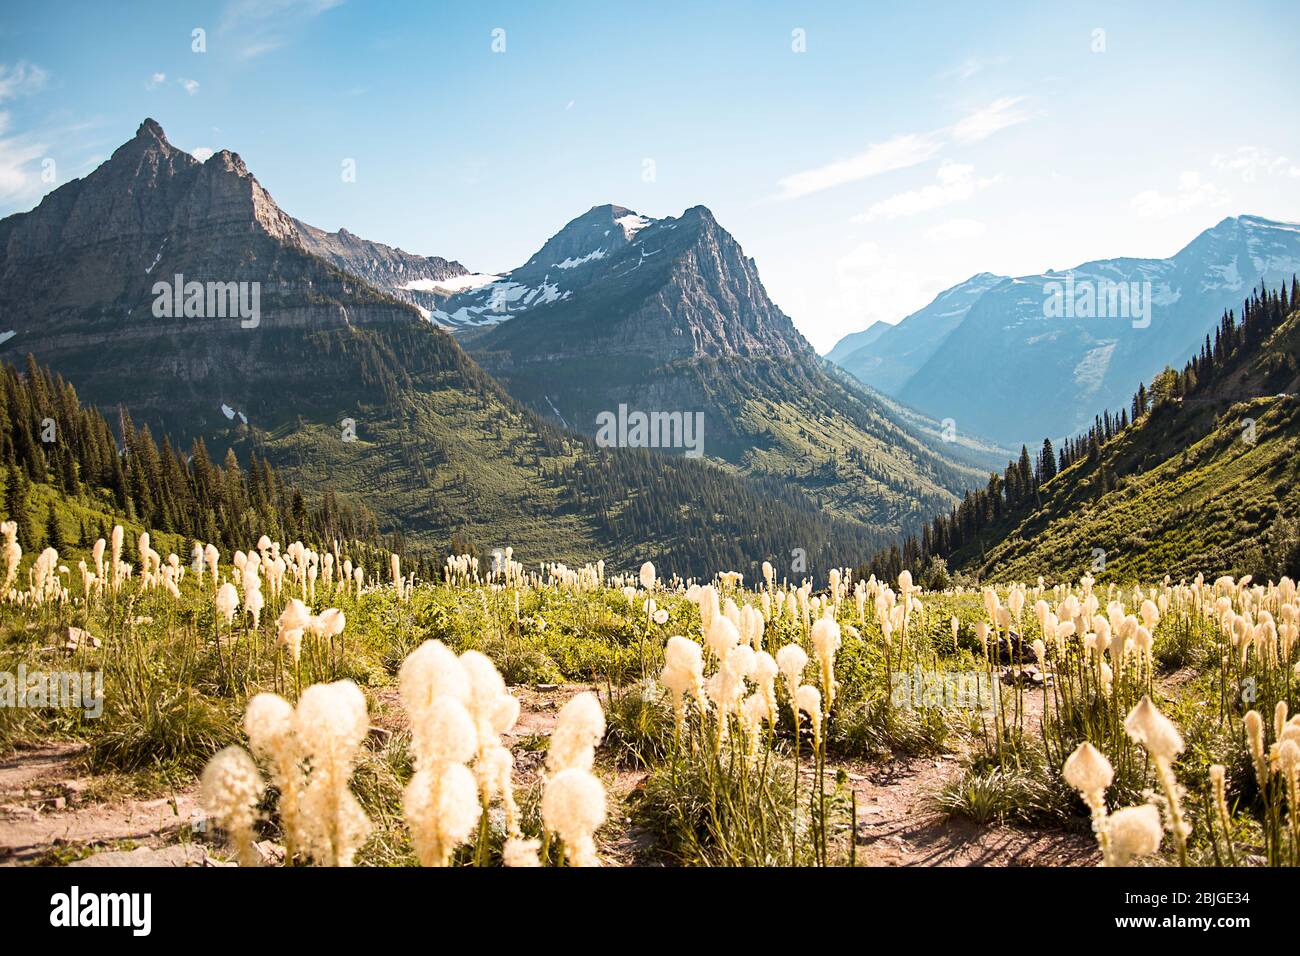 A landscape scenic view of the Rocky Mountain Range of Glacier National Park in Montana. Big blue skies and beargrass in bloom. A huge tourist destina Stock Photo